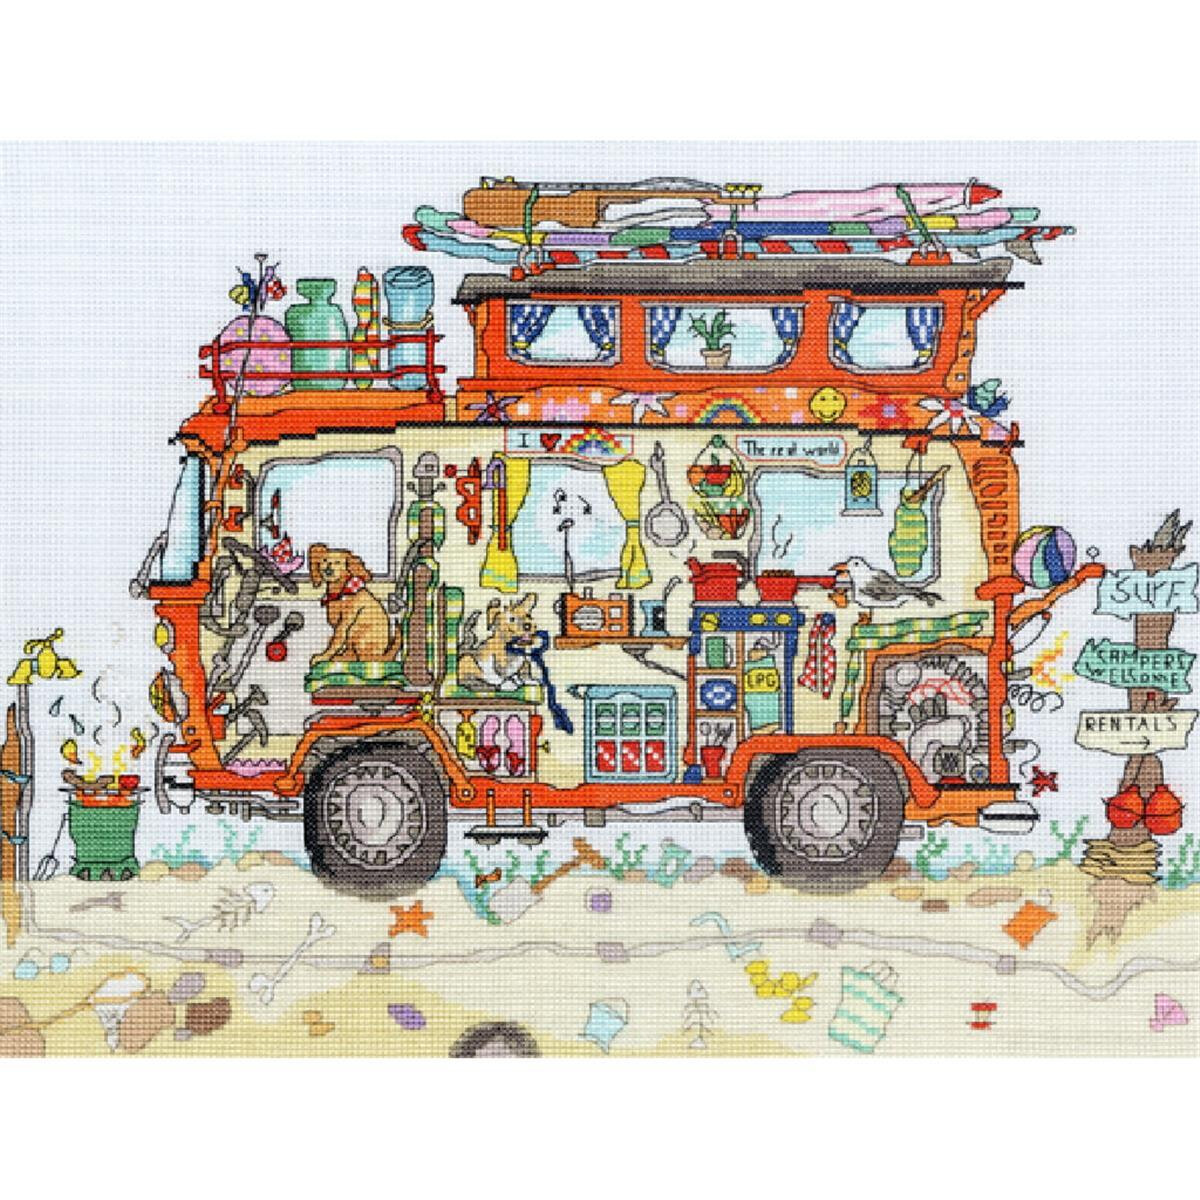 Colorful, whimsical embroidered picture of a packed...